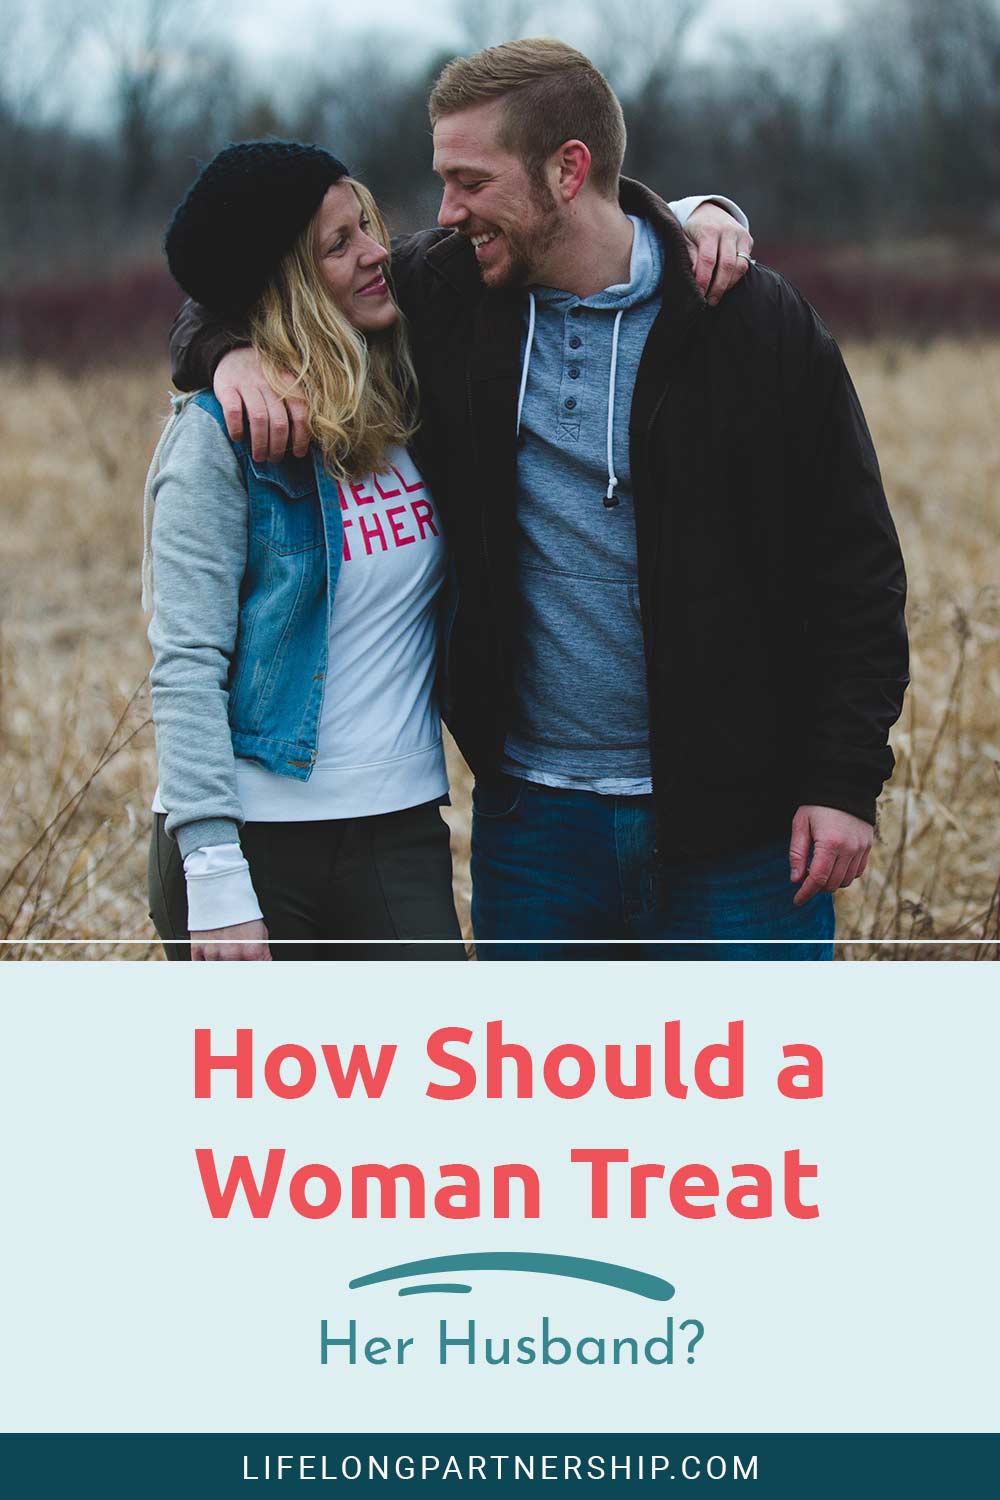 How Should a Woman Treat Her Husband?